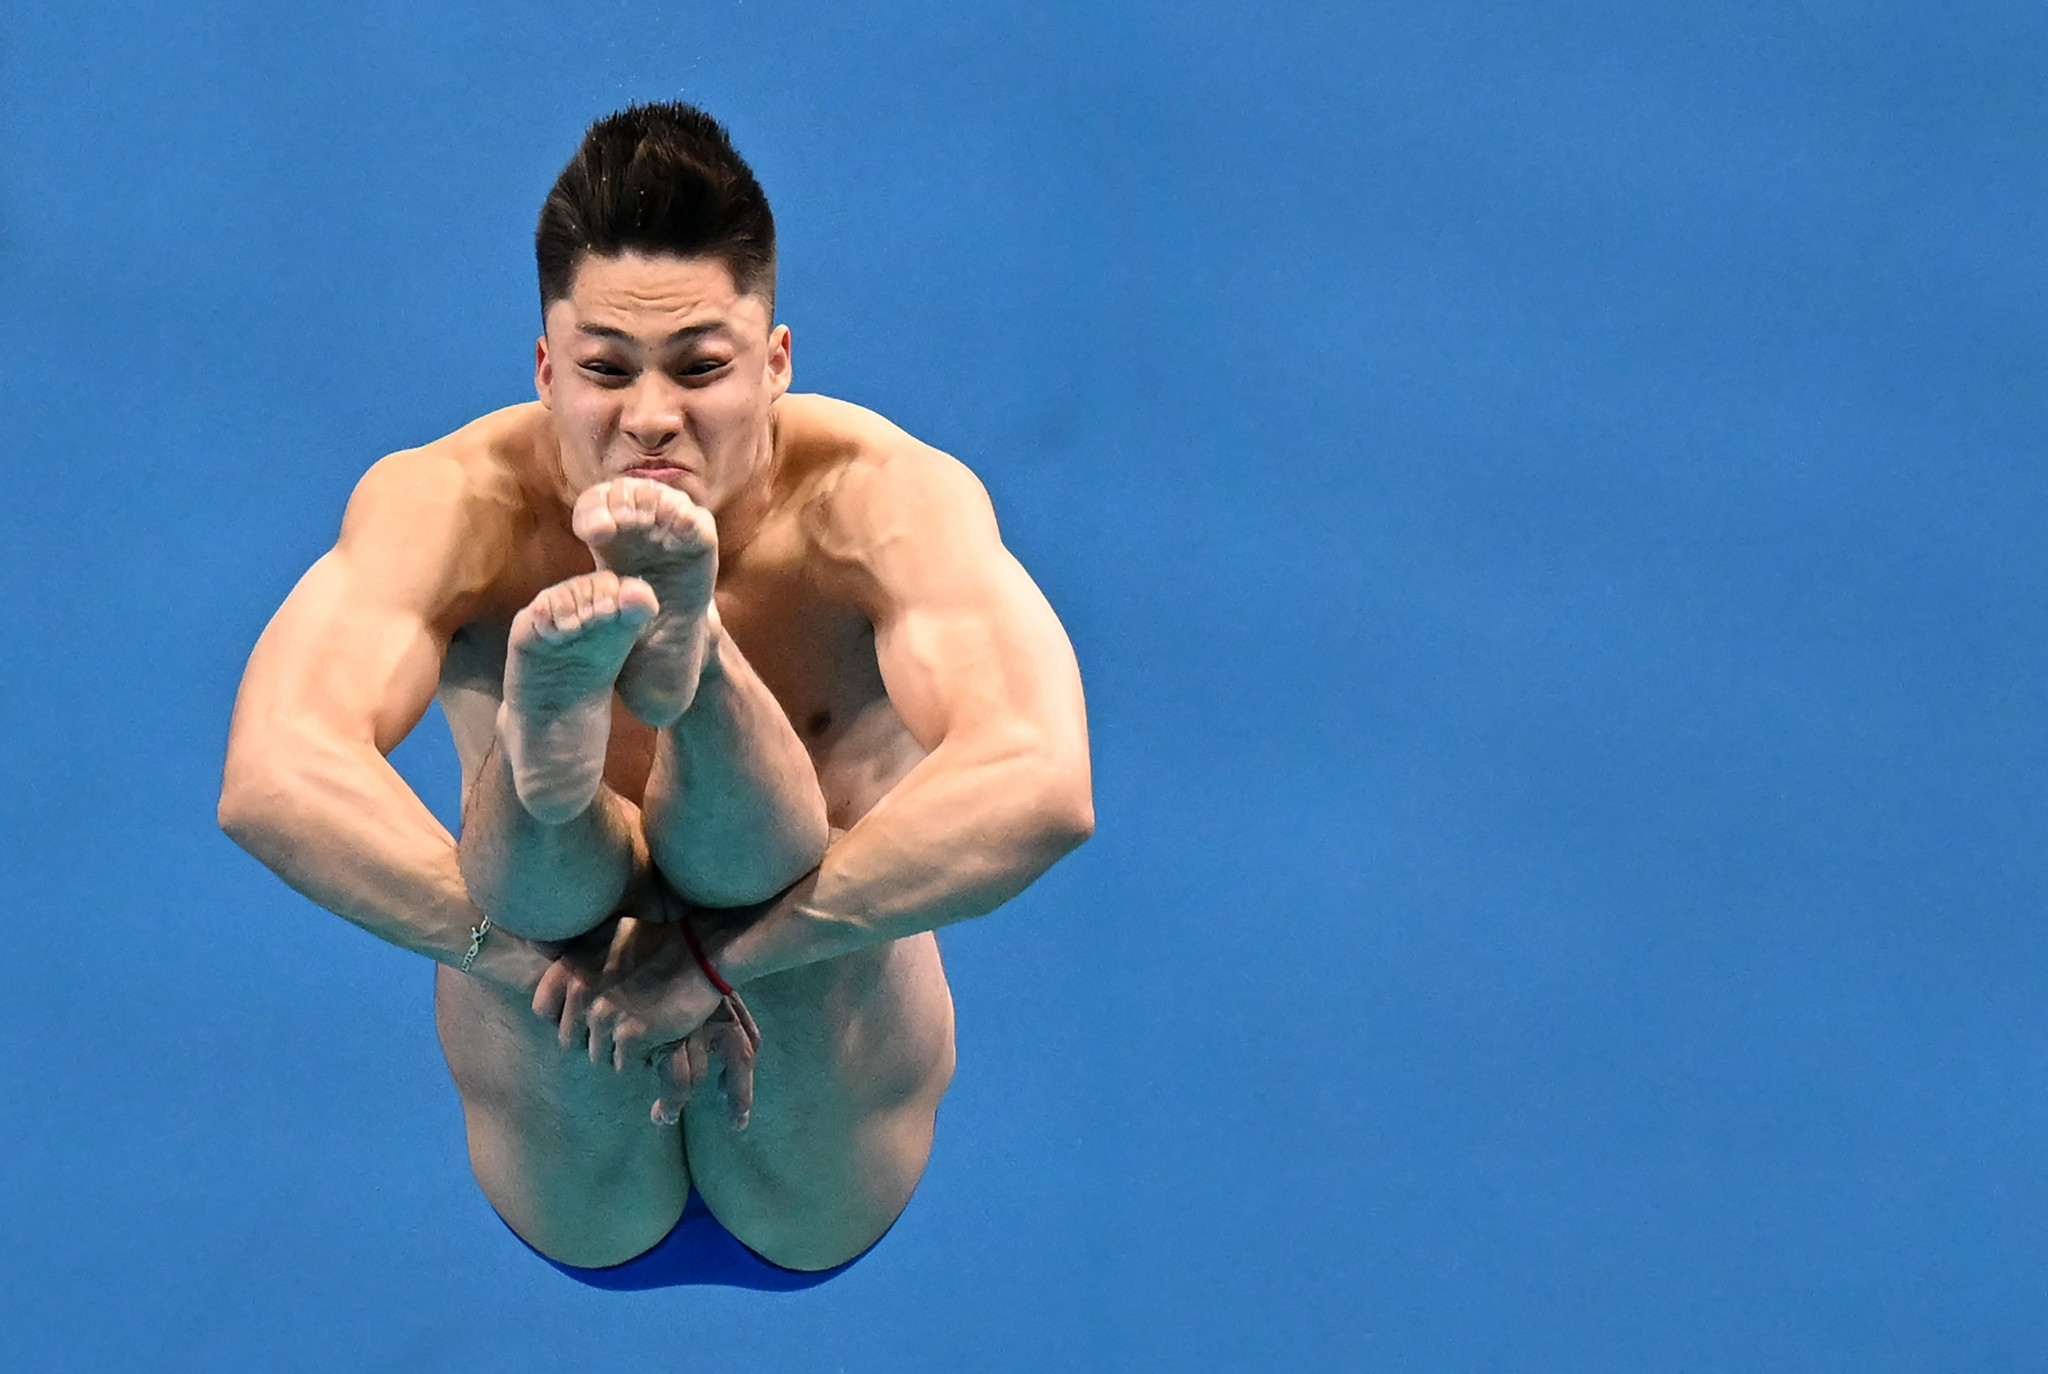 Osmar Olvera of Mexico was in sensational form as he won men's 1m springboard gold ©Getty Images